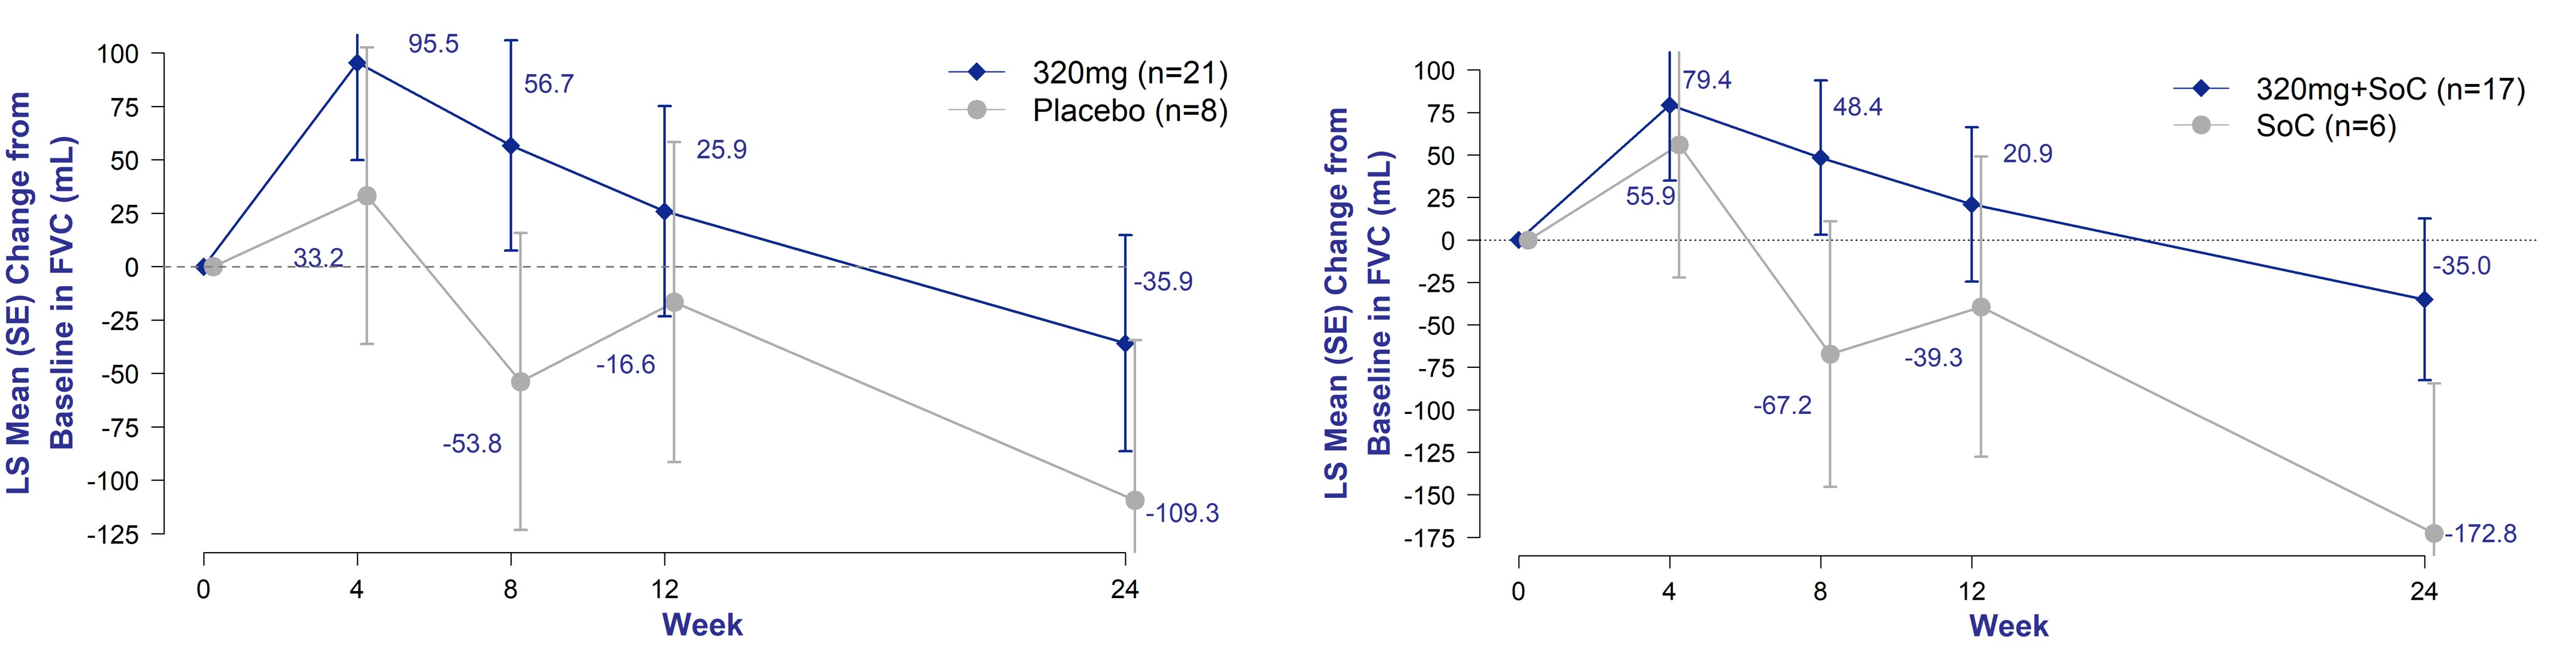 Figure 1. Change in FVC from Baseline of Bexotegrast 320 mg Over 24 Weeks